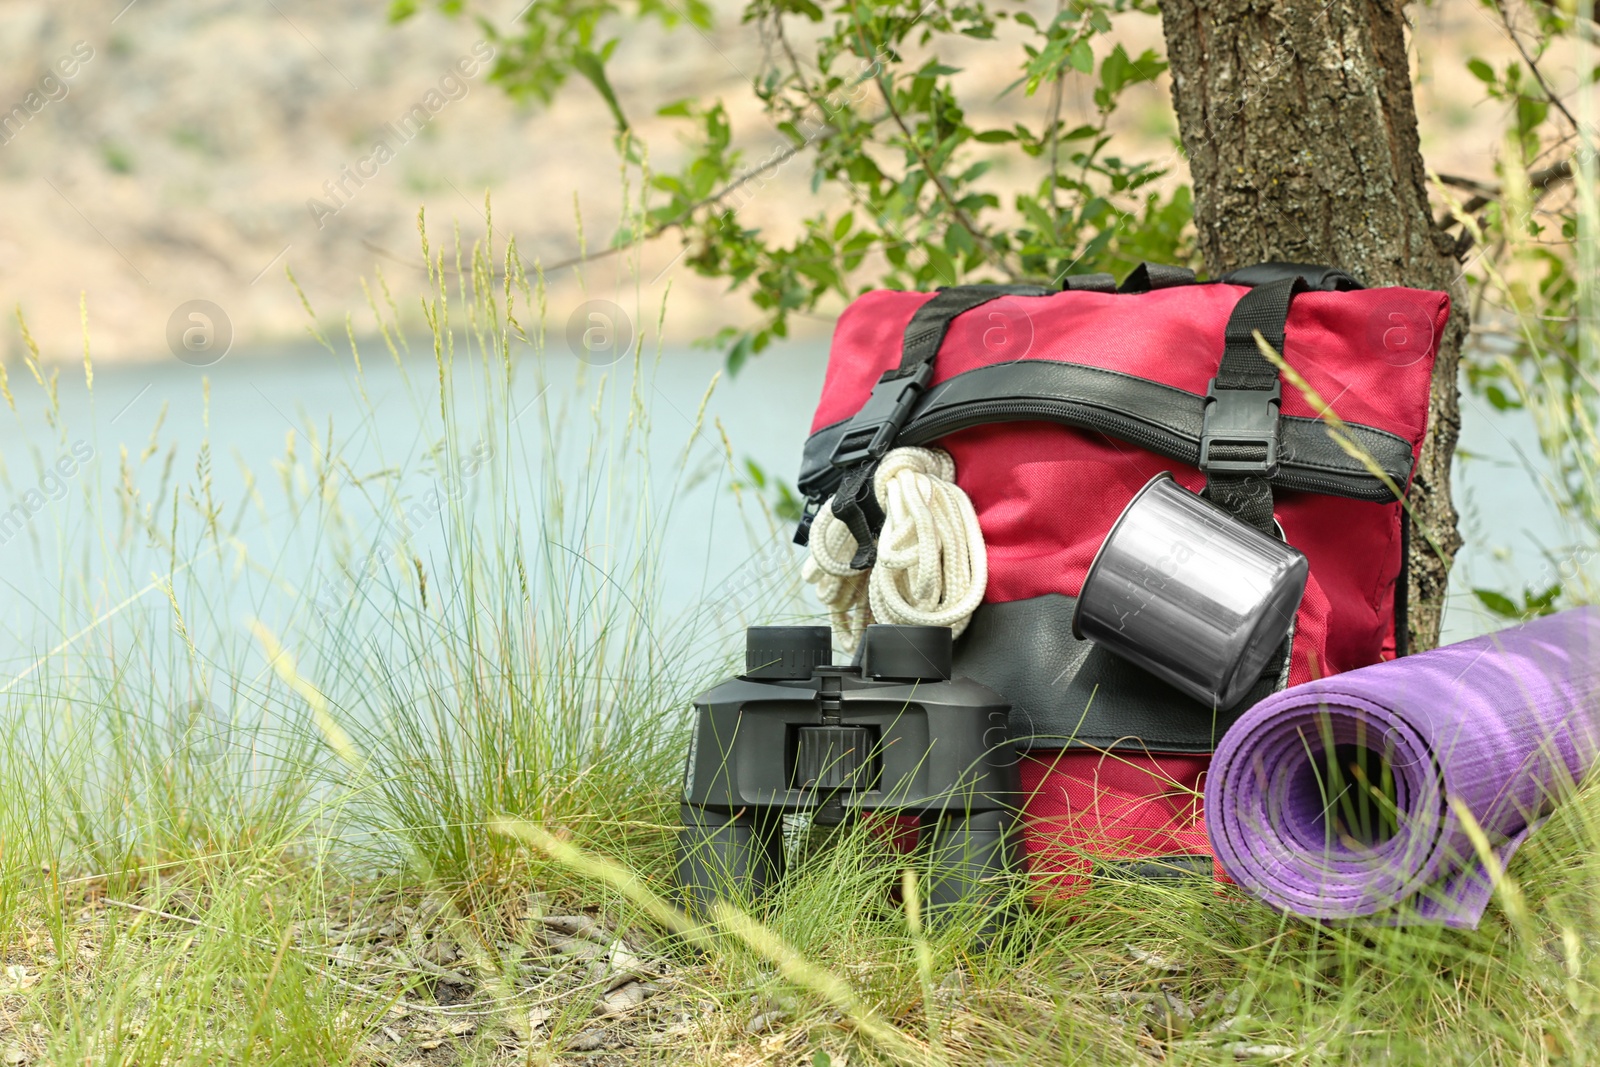 Photo of Backpack and camping equipment on grass near tree in wilderness. Space for text